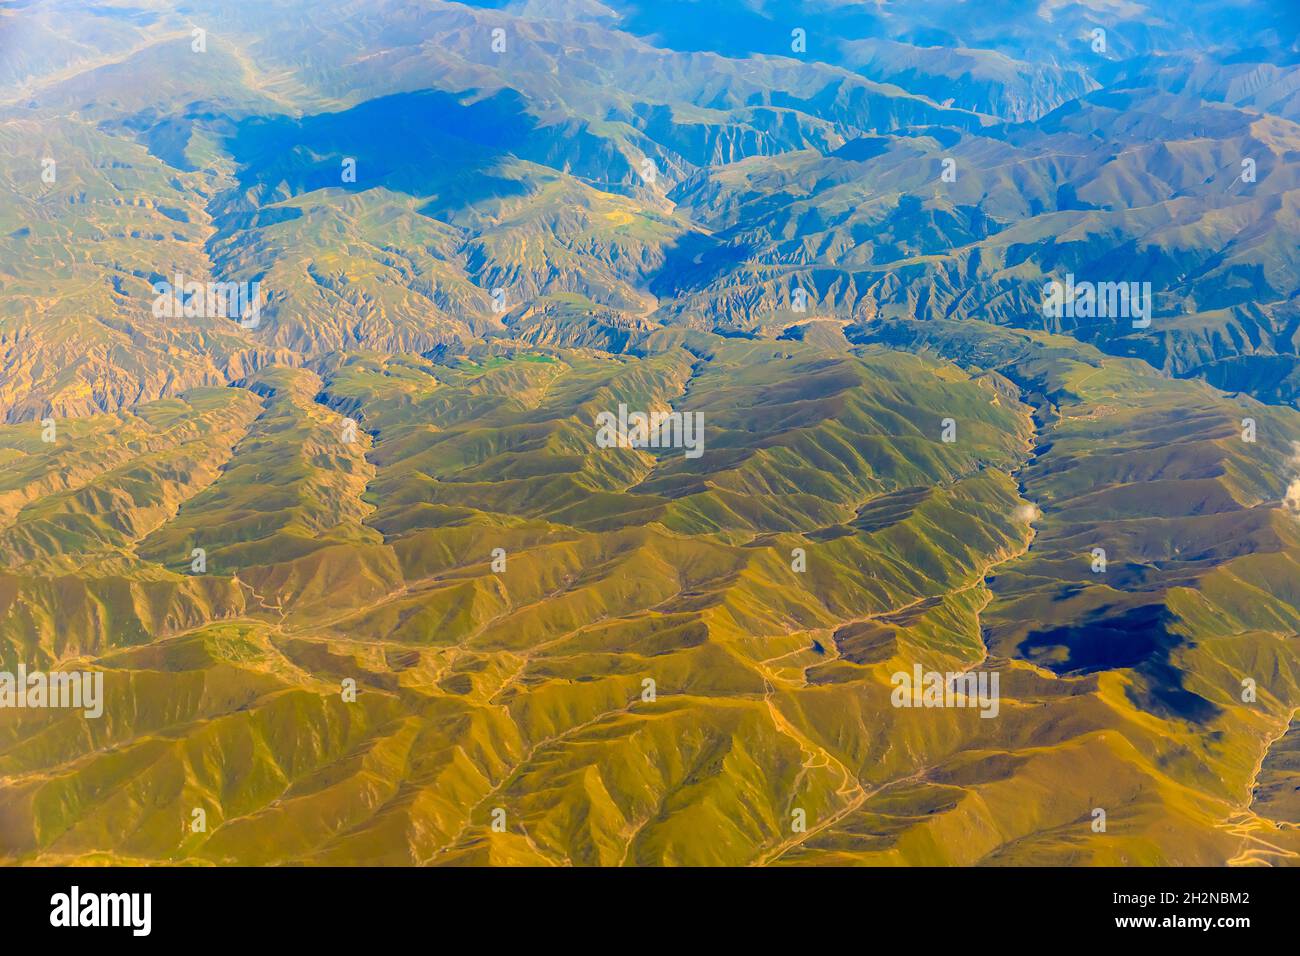 Aerial view of the green mountain scenery. Stock Photo